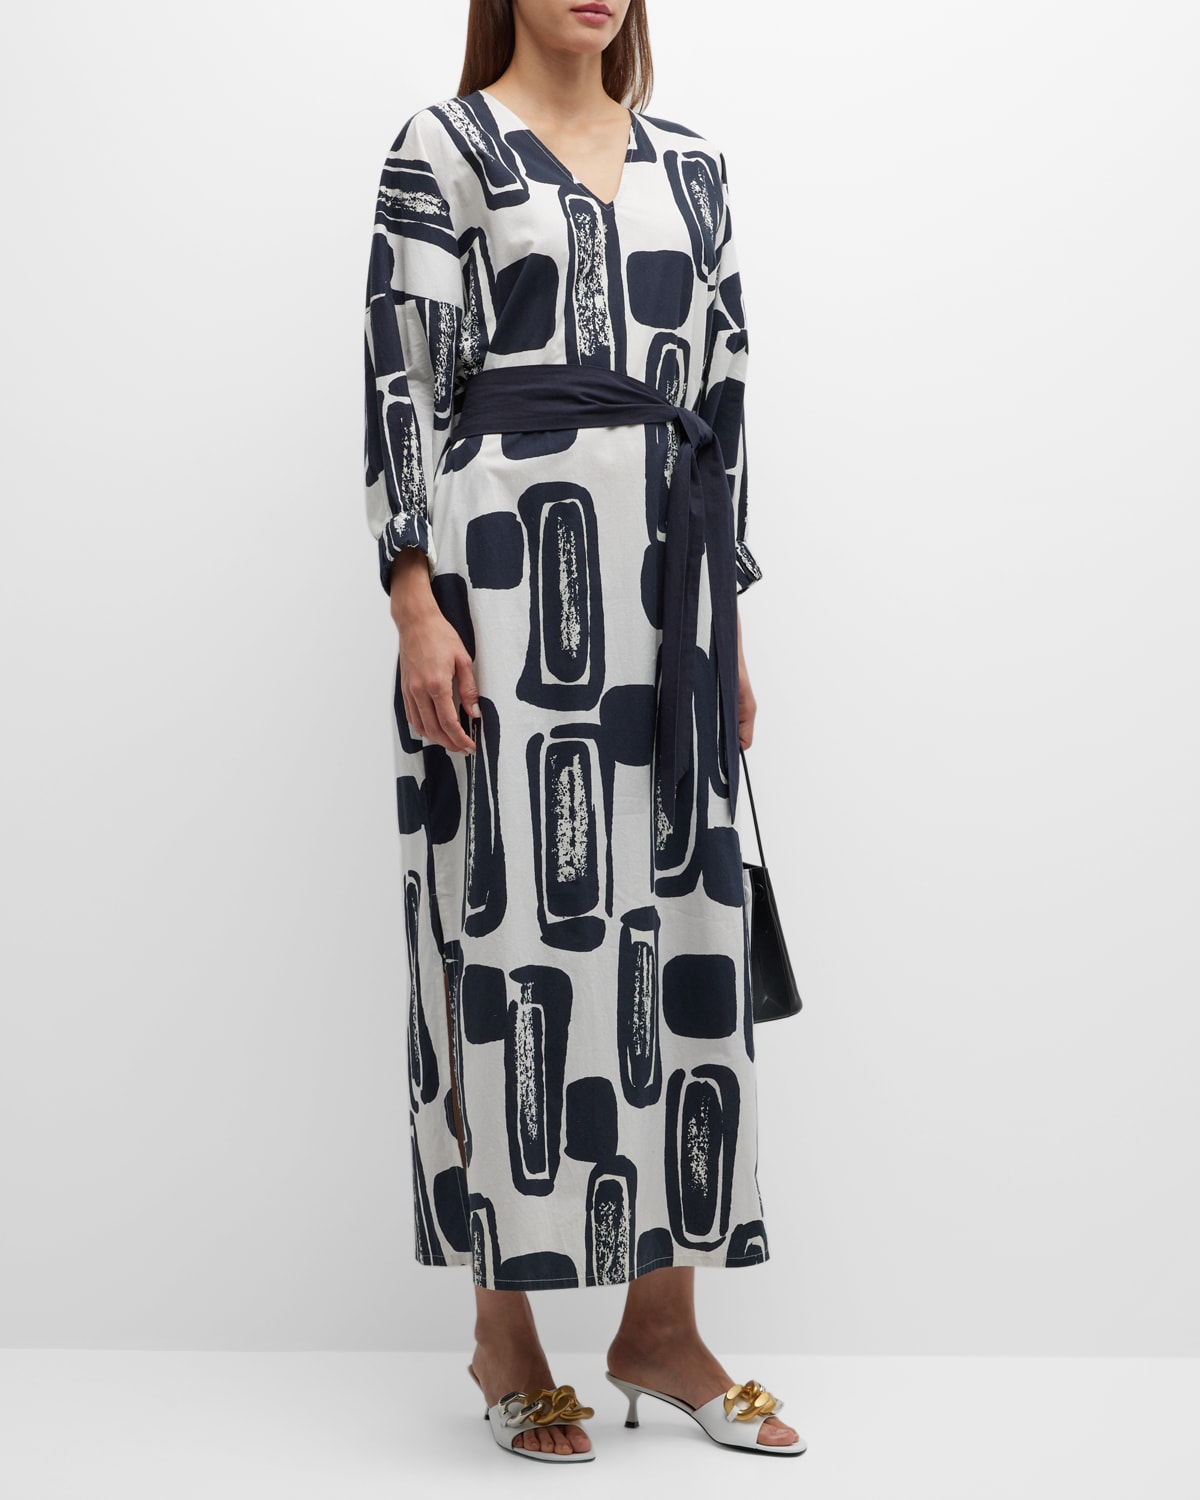 FRANCES VALENTINE ROSA BELTED ABSTRACT-PRINT CAFTAN